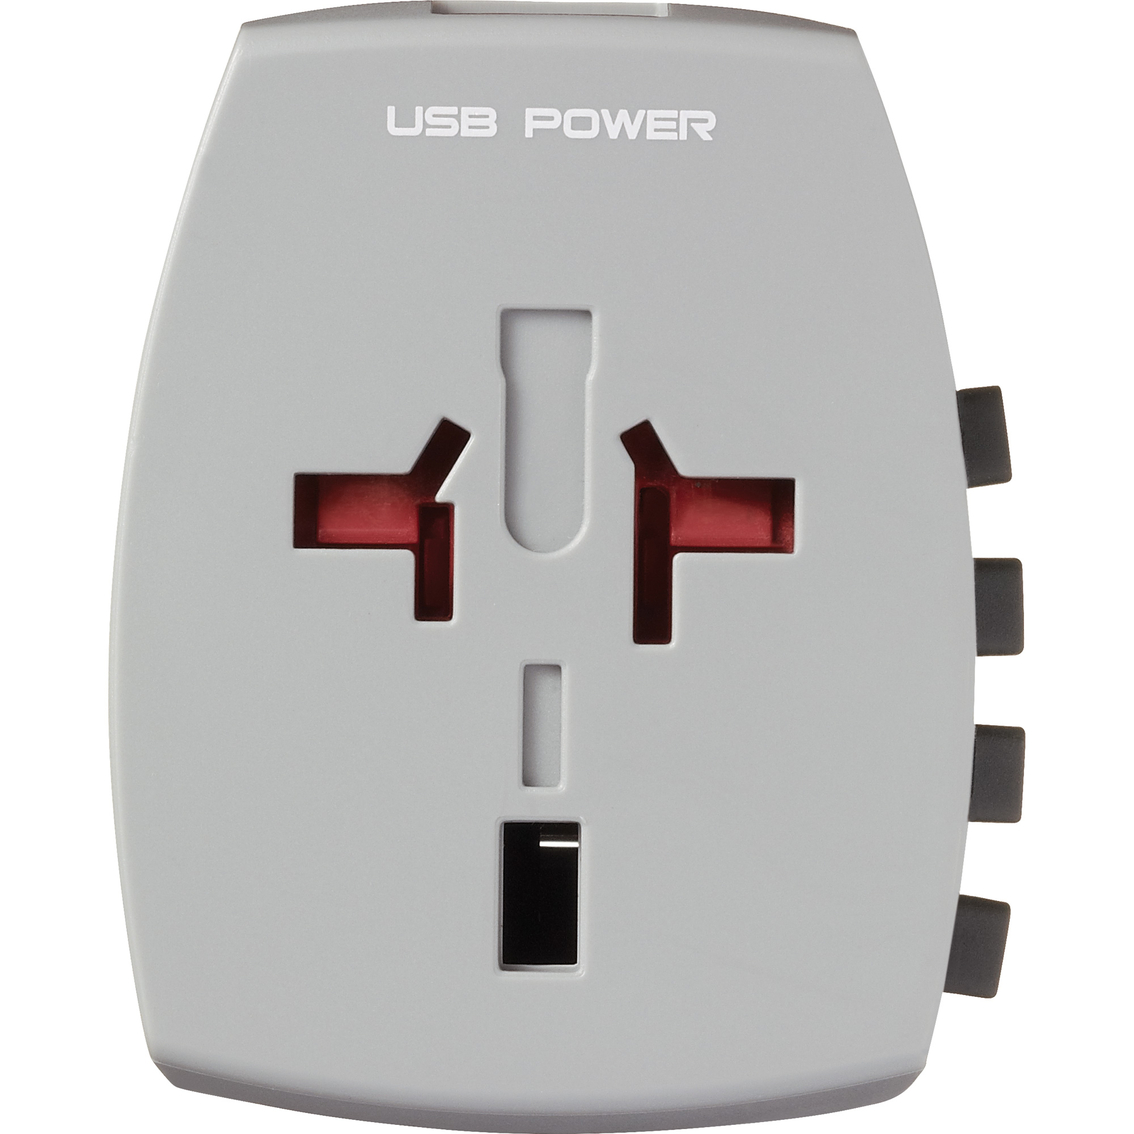 Go Travel Worldwide Adaptor and Twin USB Charger - Image 4 of 4